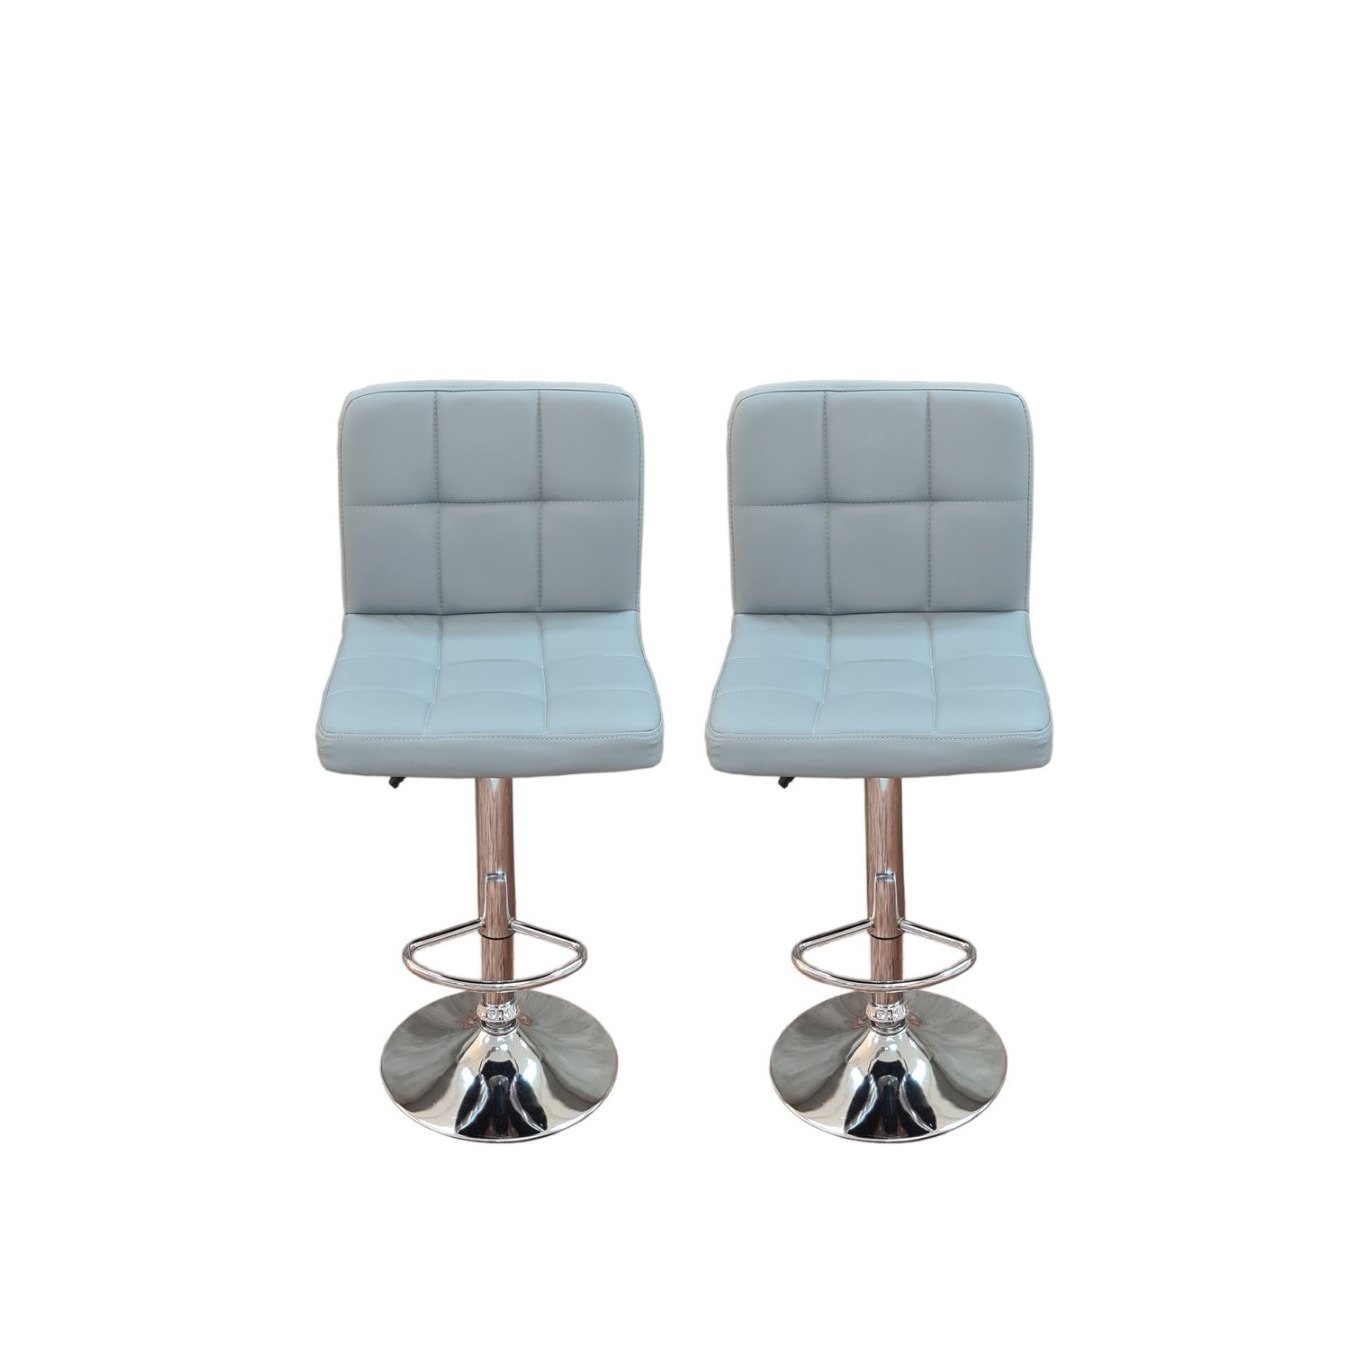 Ronin Faux Leather Swivel Bar Stool Set of 2 available in white ed black brown and grey